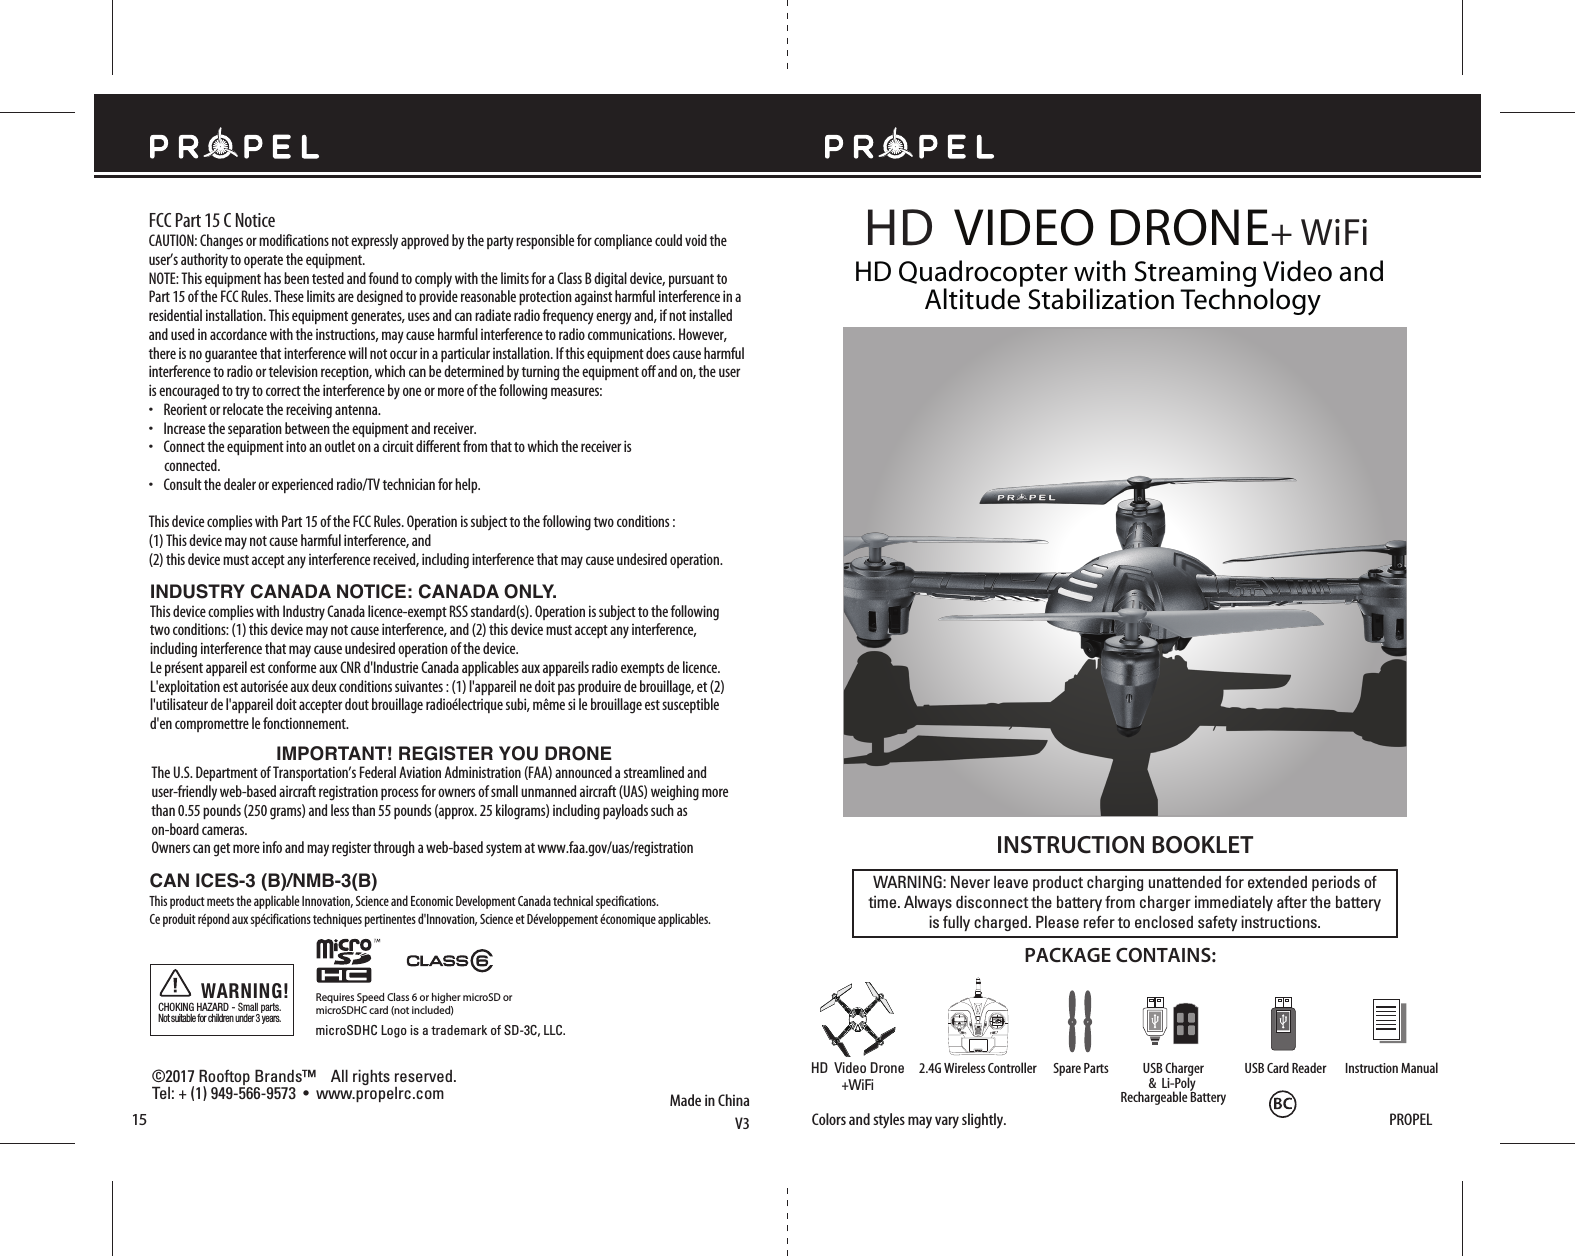 Propel Drone Instruction Manual - Picture Of Drone